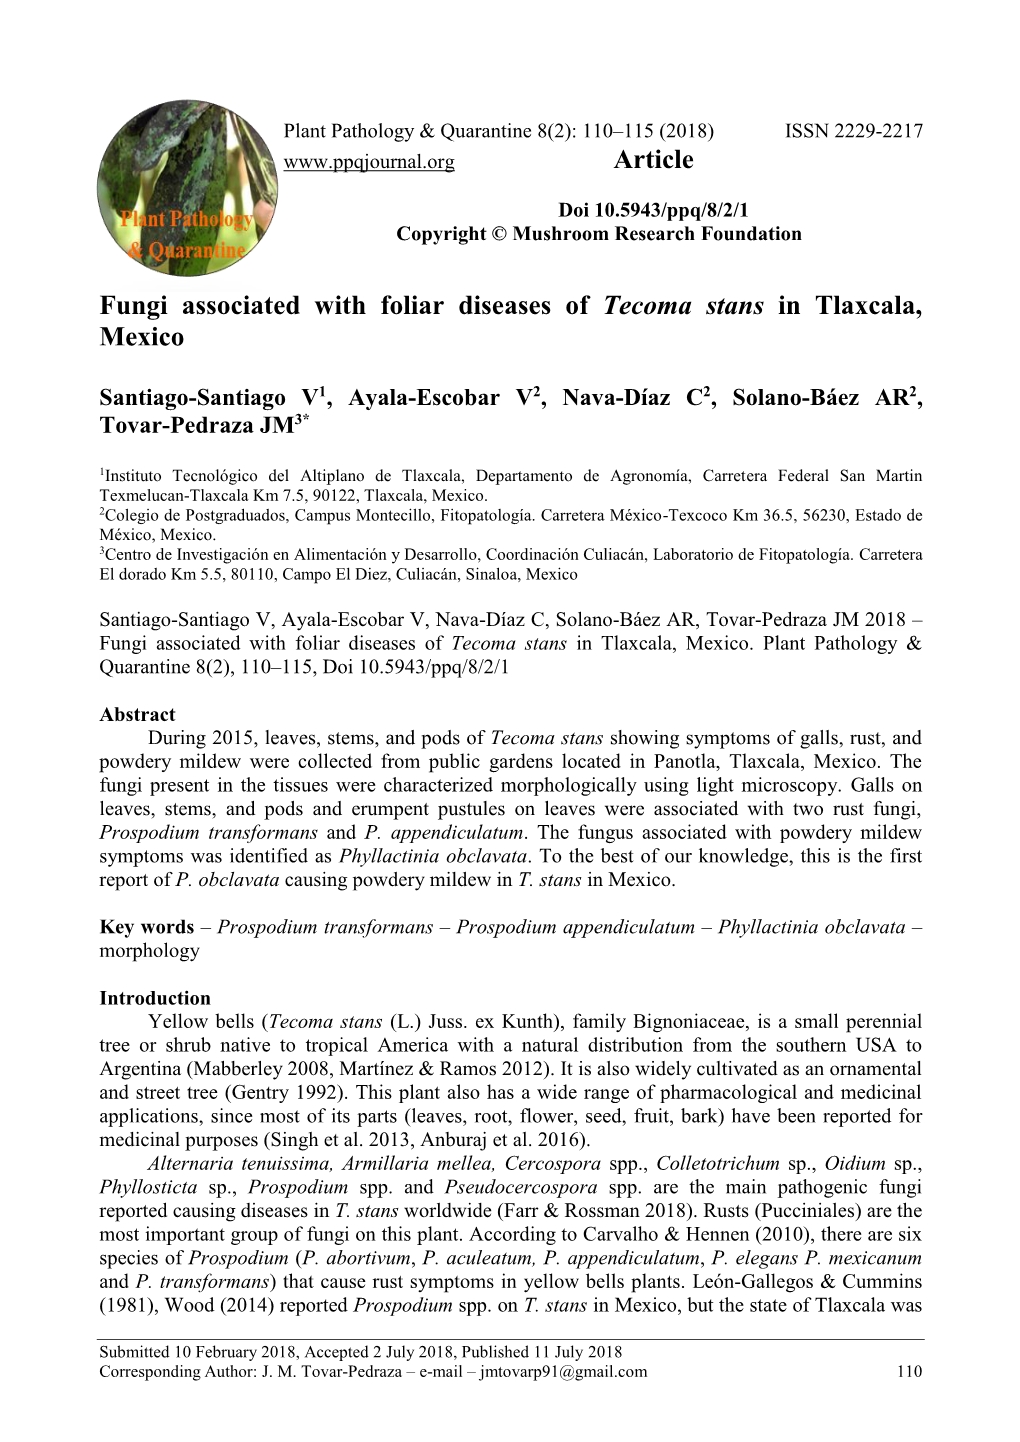 Fungi Associated with Foliar Diseases of Tecoma Stans in Tlaxcala, Mexico